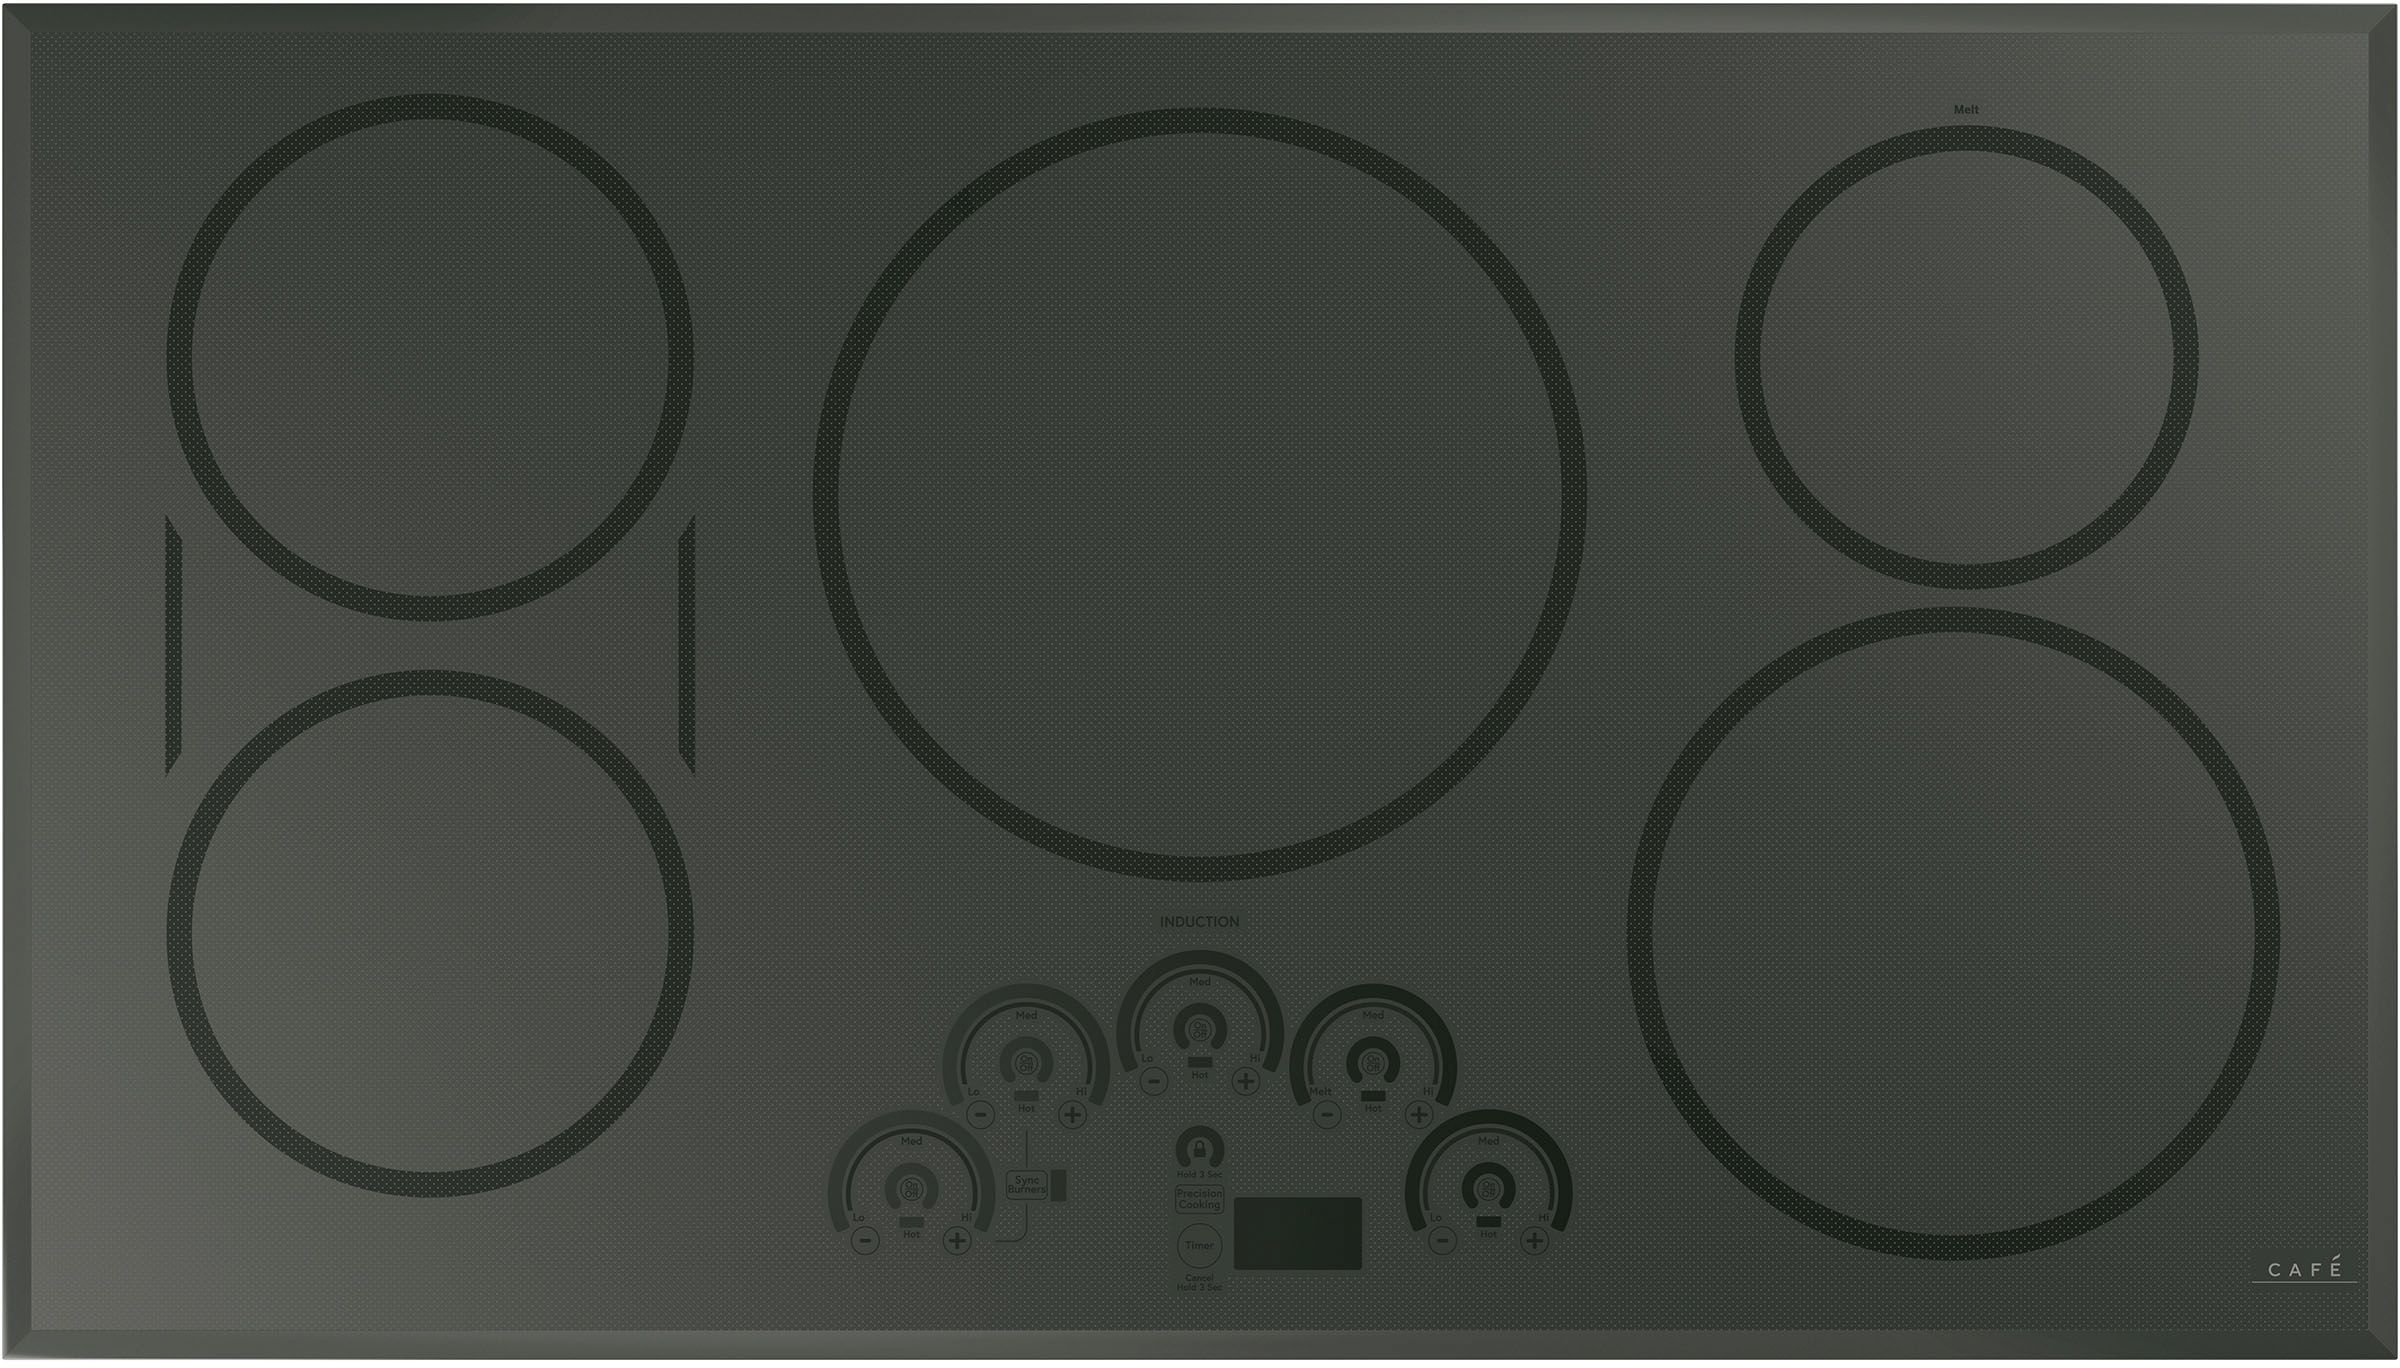 Cafe Induction cooktop